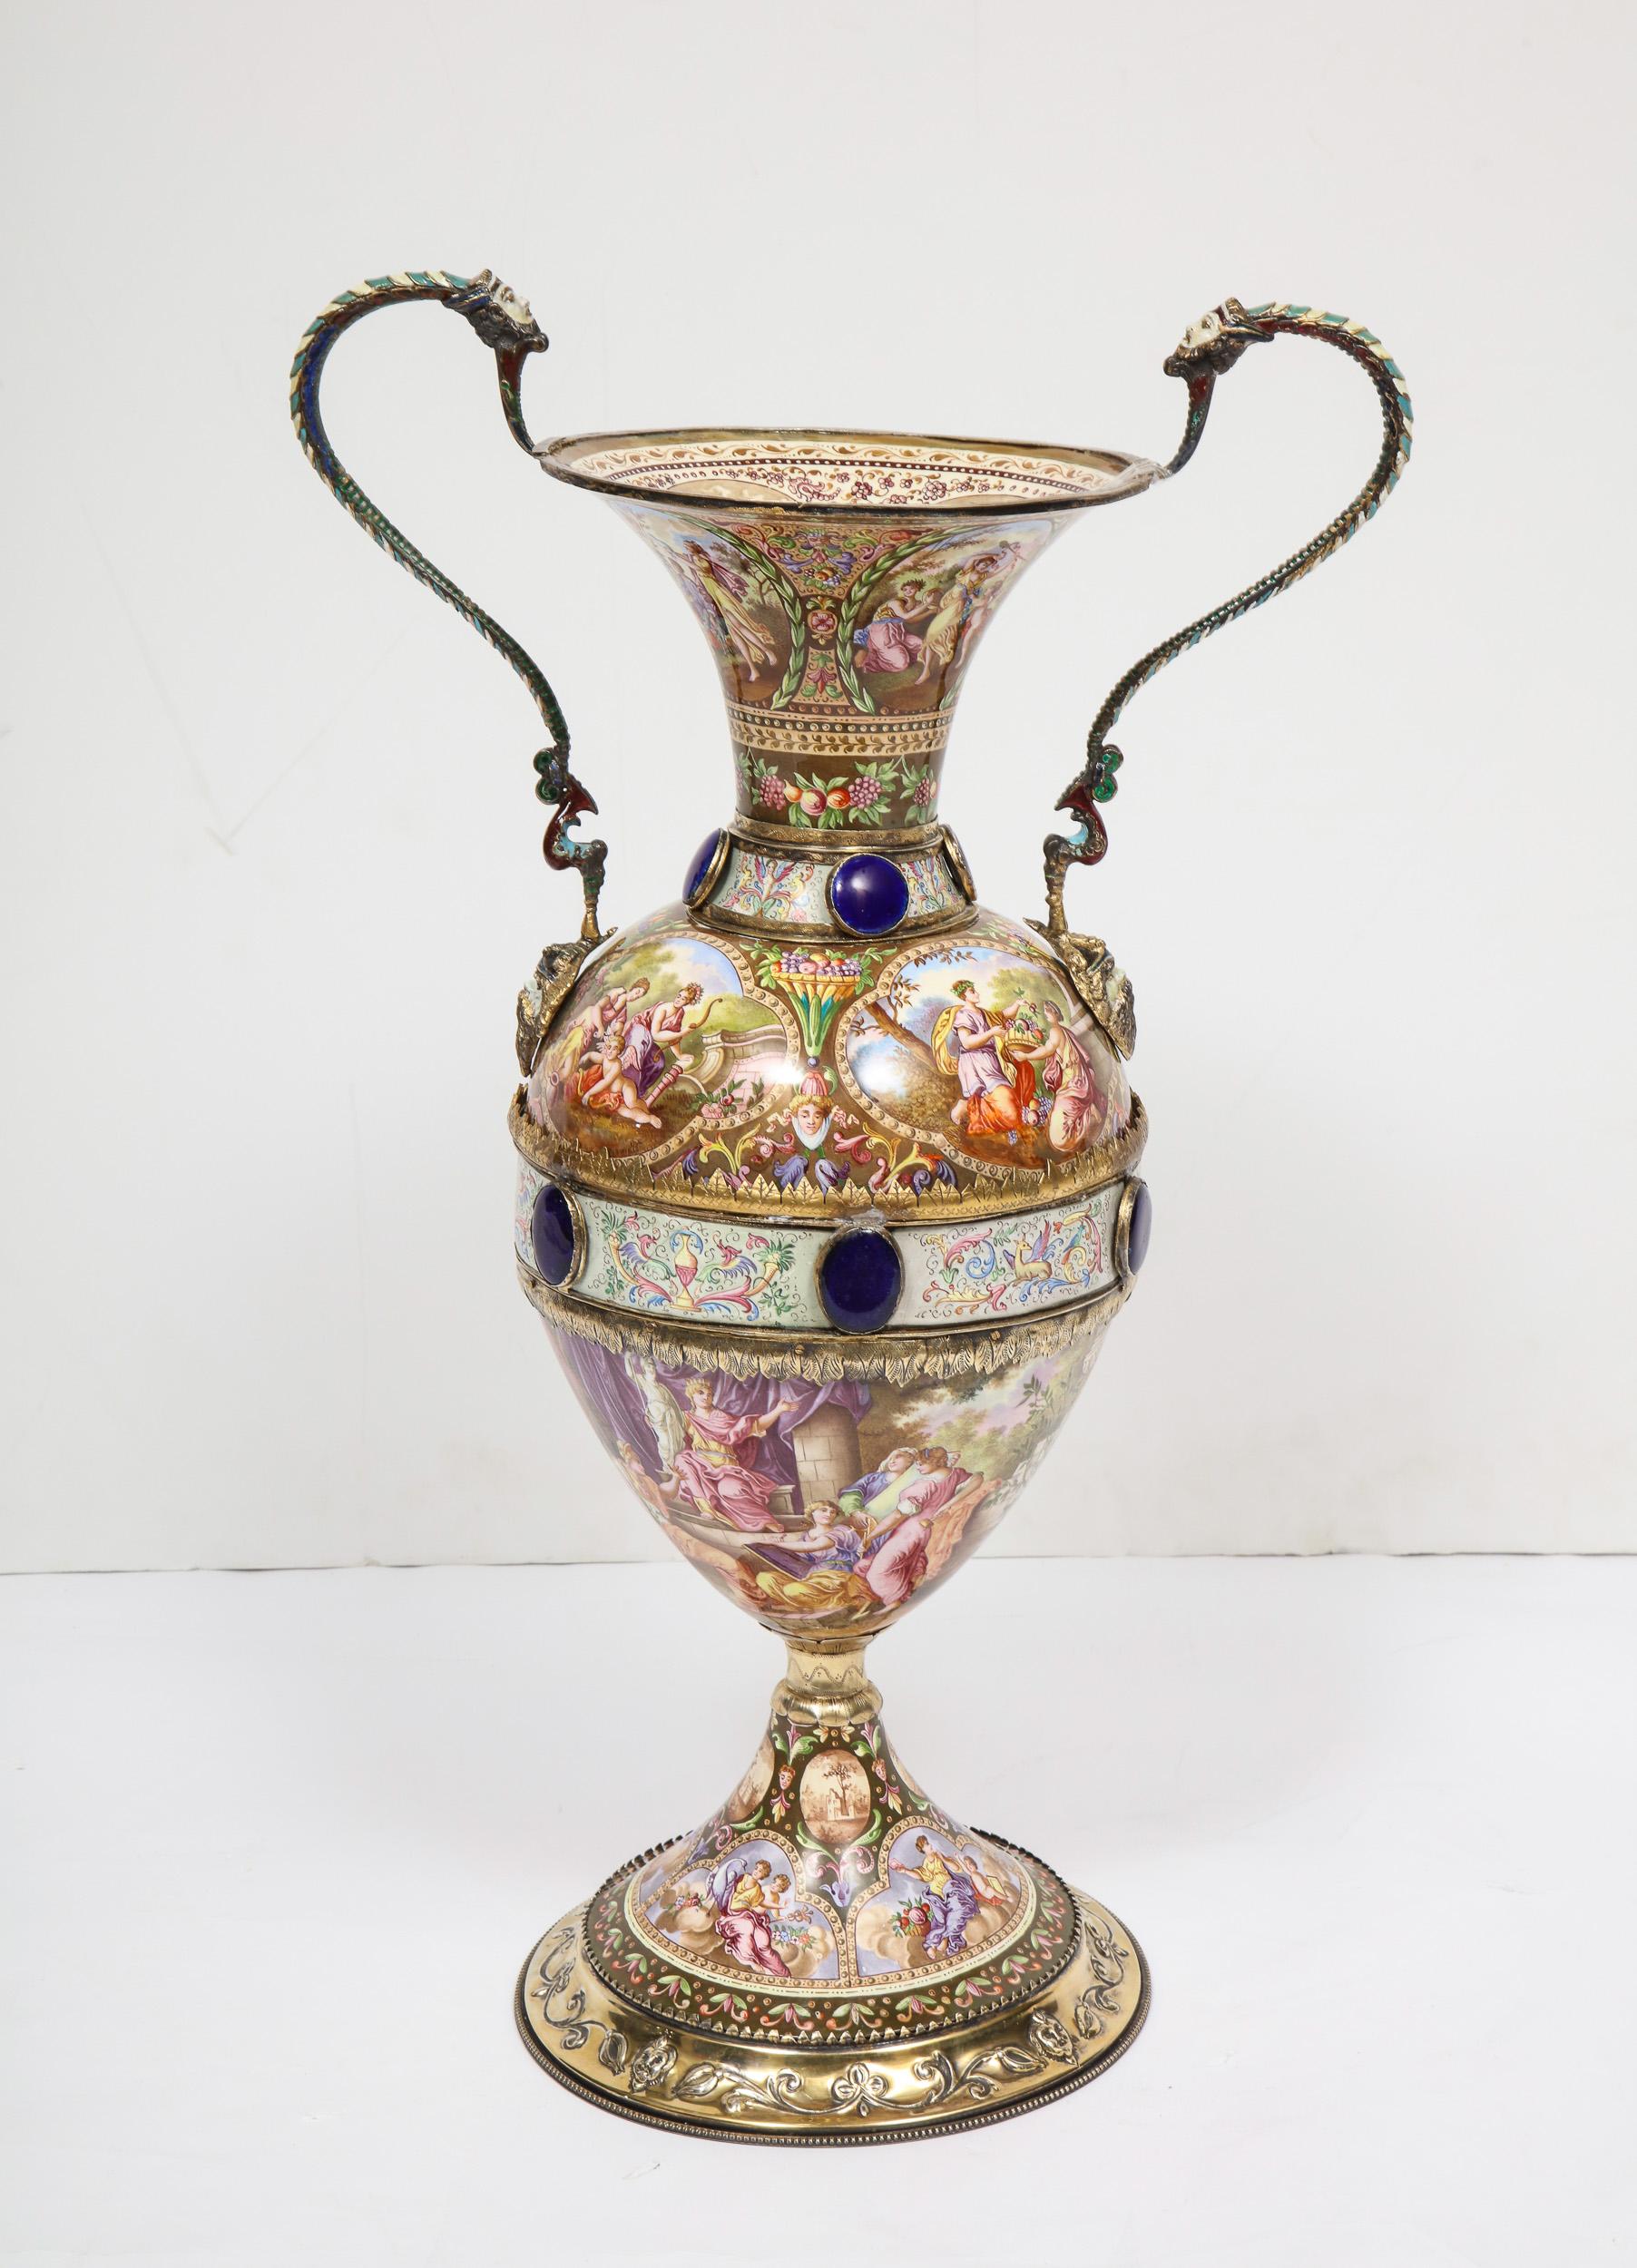 An extremely large Austrian silver and Viennese enamel twin handled vase, 1880.
In the manner of Herman Bohm.

The enameling on this vase is of outstanding quality. Very Fine quality silver mounts throughout. With blue enamel roundels, and